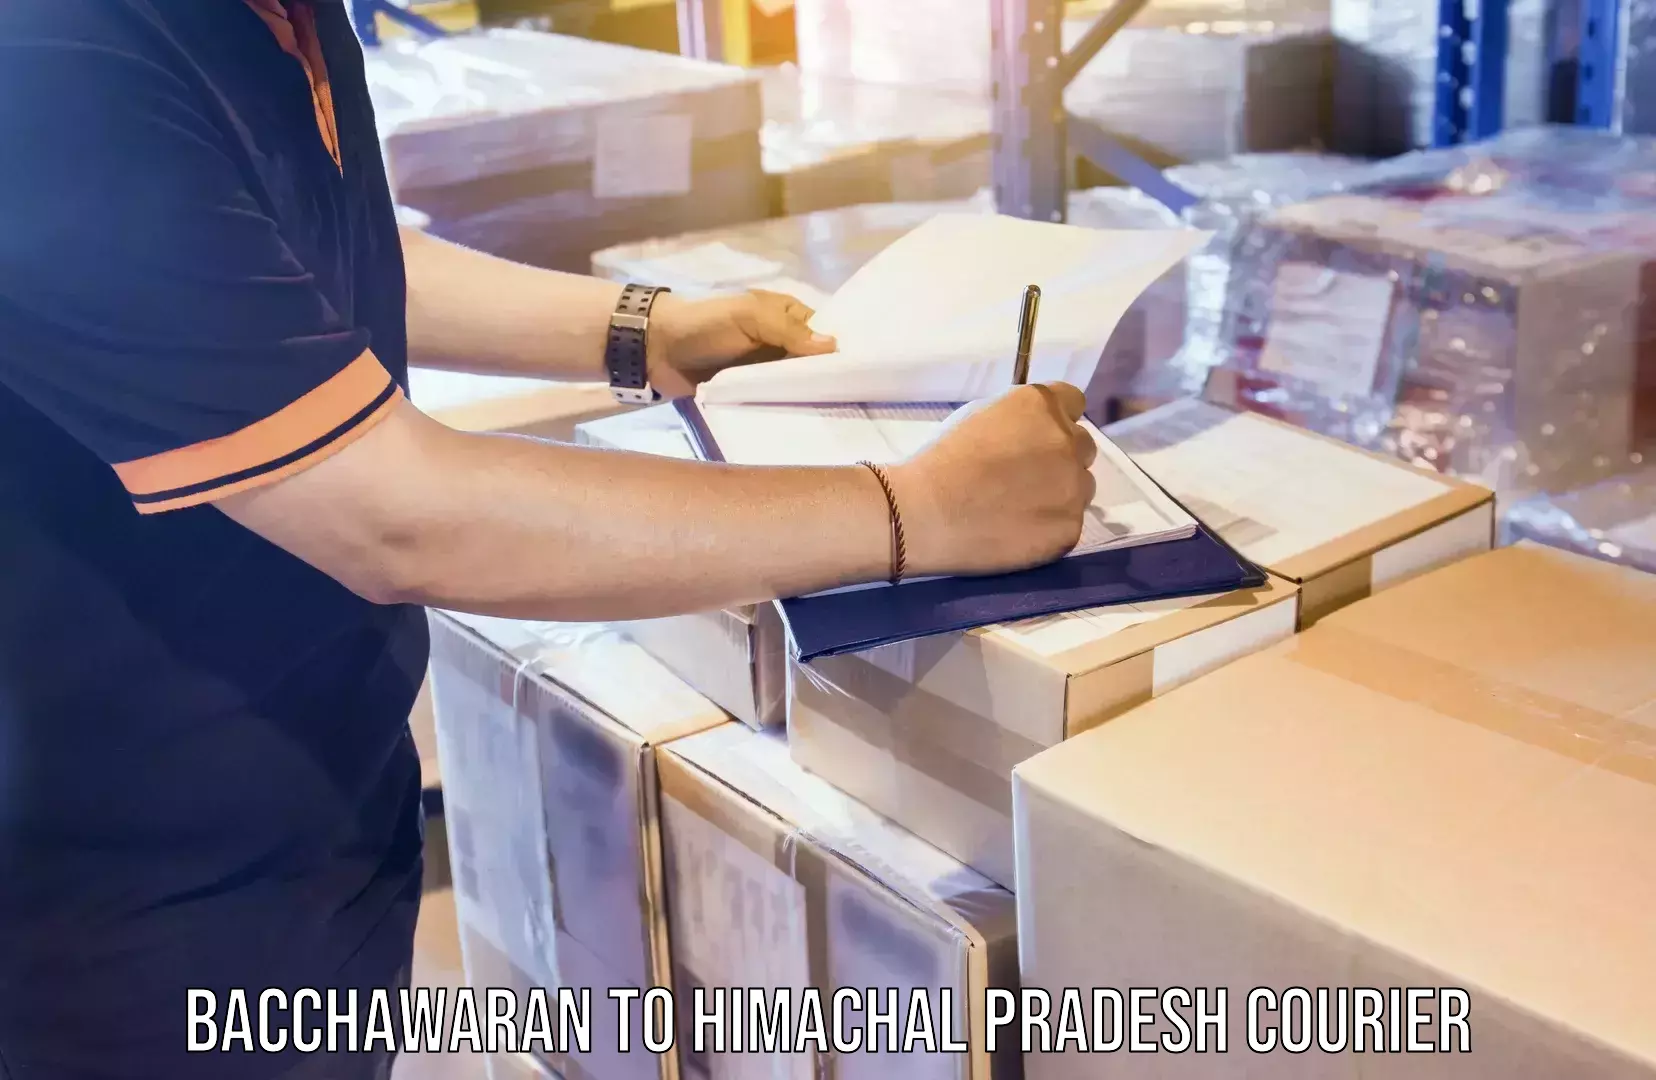 Personalized courier experiences Bacchawaran to Himachal Pradesh